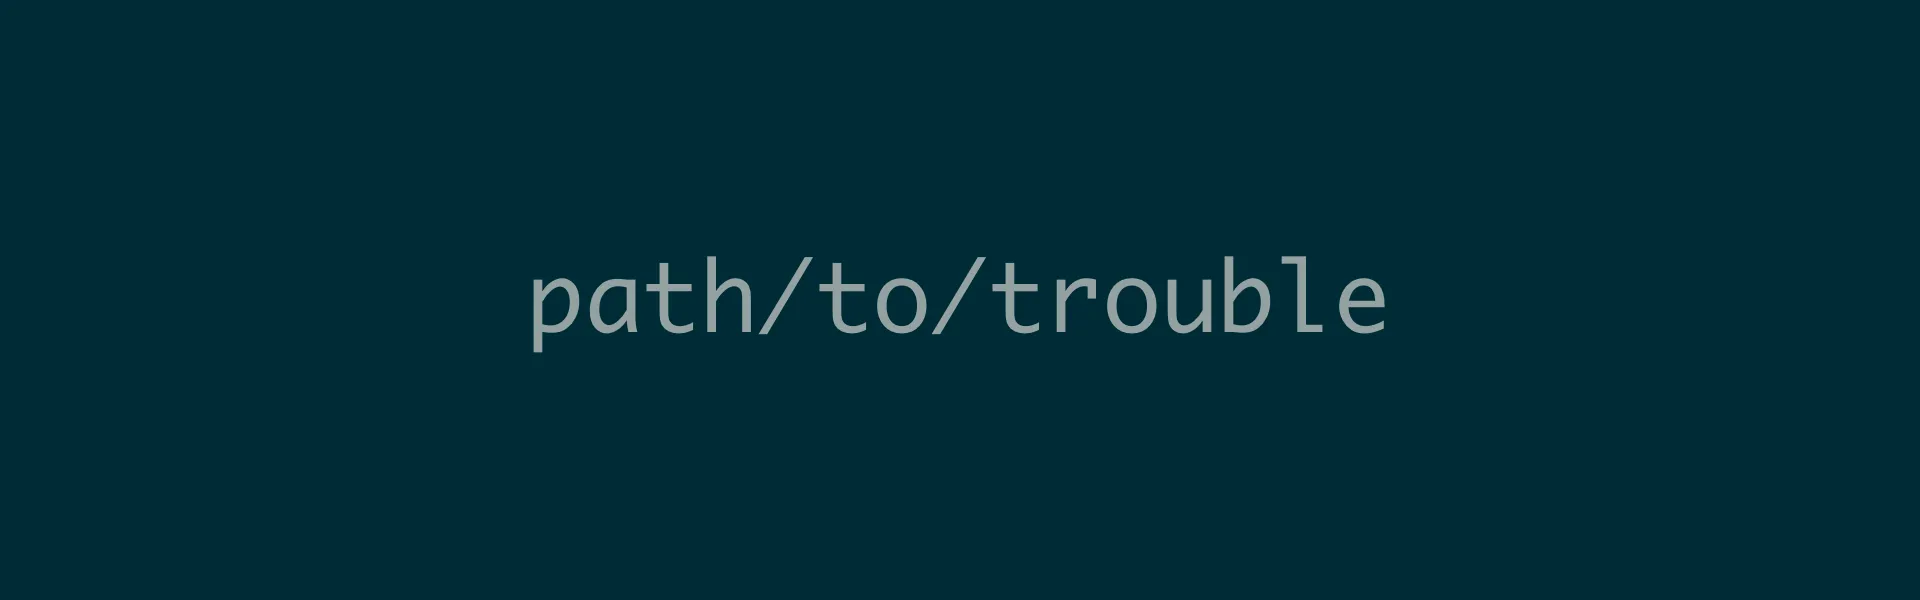 A terminal font with the text path/to/trouble